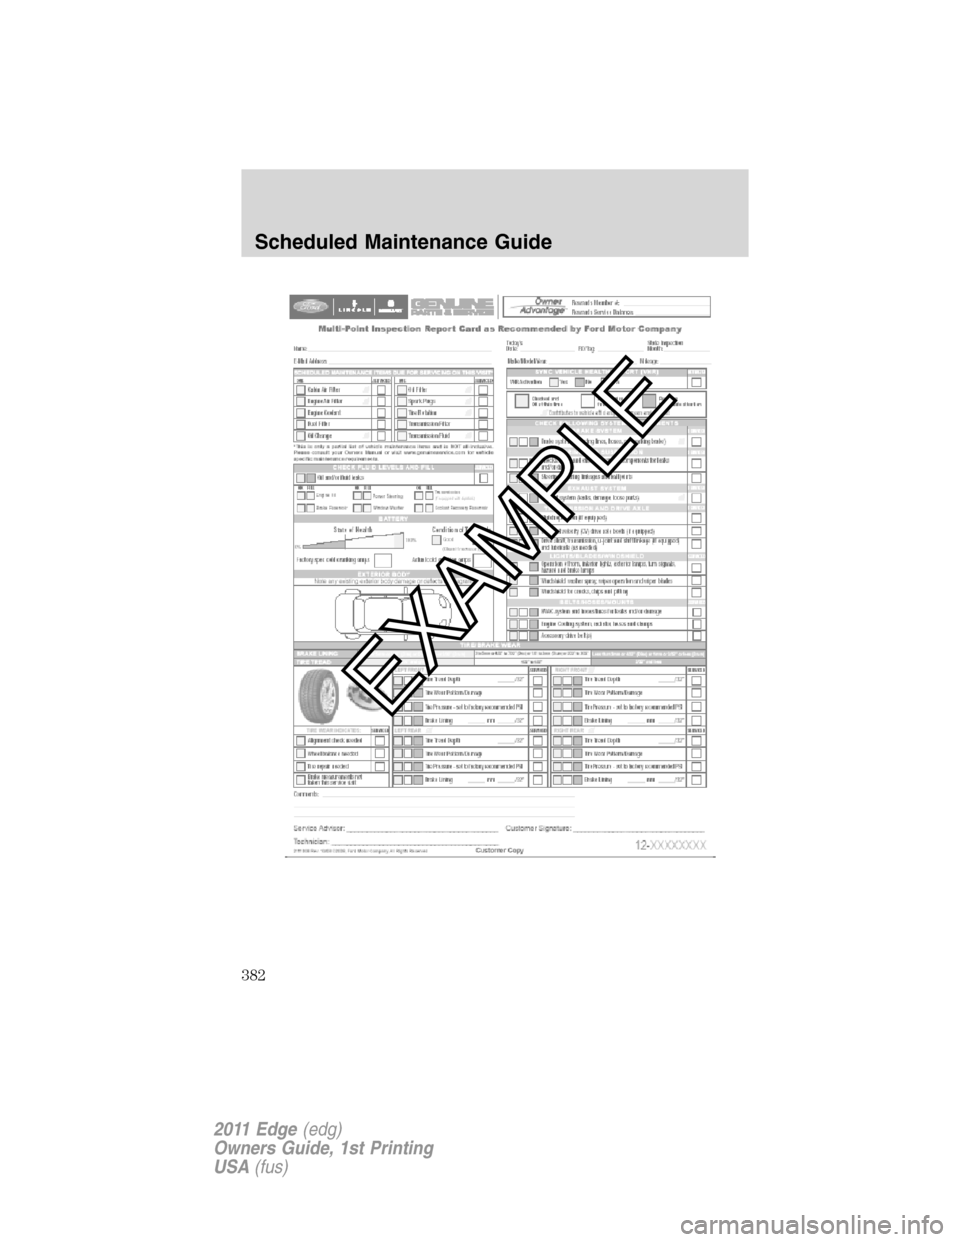 FORD EDGE 2011 1.G Owners Manual Scheduled Maintenance Guide
382
2011 Edge(edg)
Owners Guide, 1st Printing
USA(fus) 